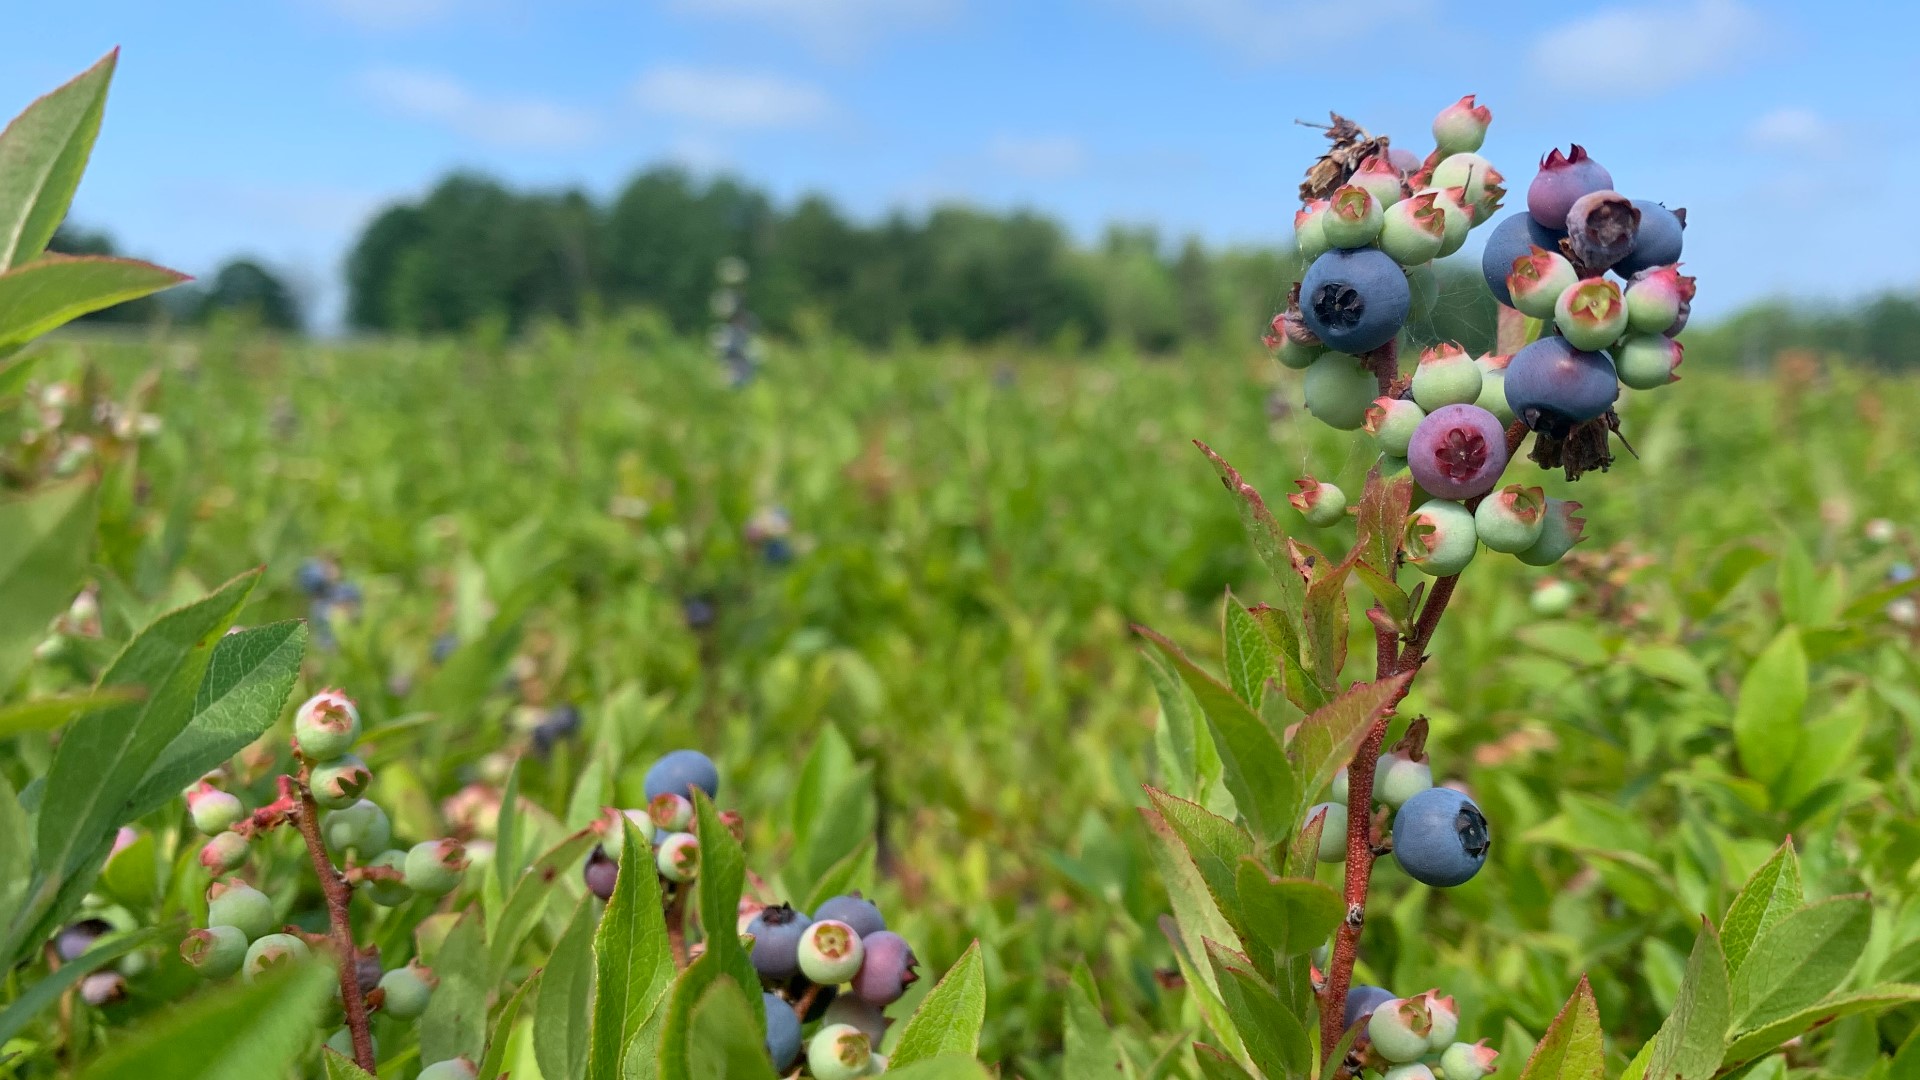 The University of Maine Cooperative Extension is partnering with BlueWave Solar and Navisun on a new solar project being installed on a Rockport blueberry field.